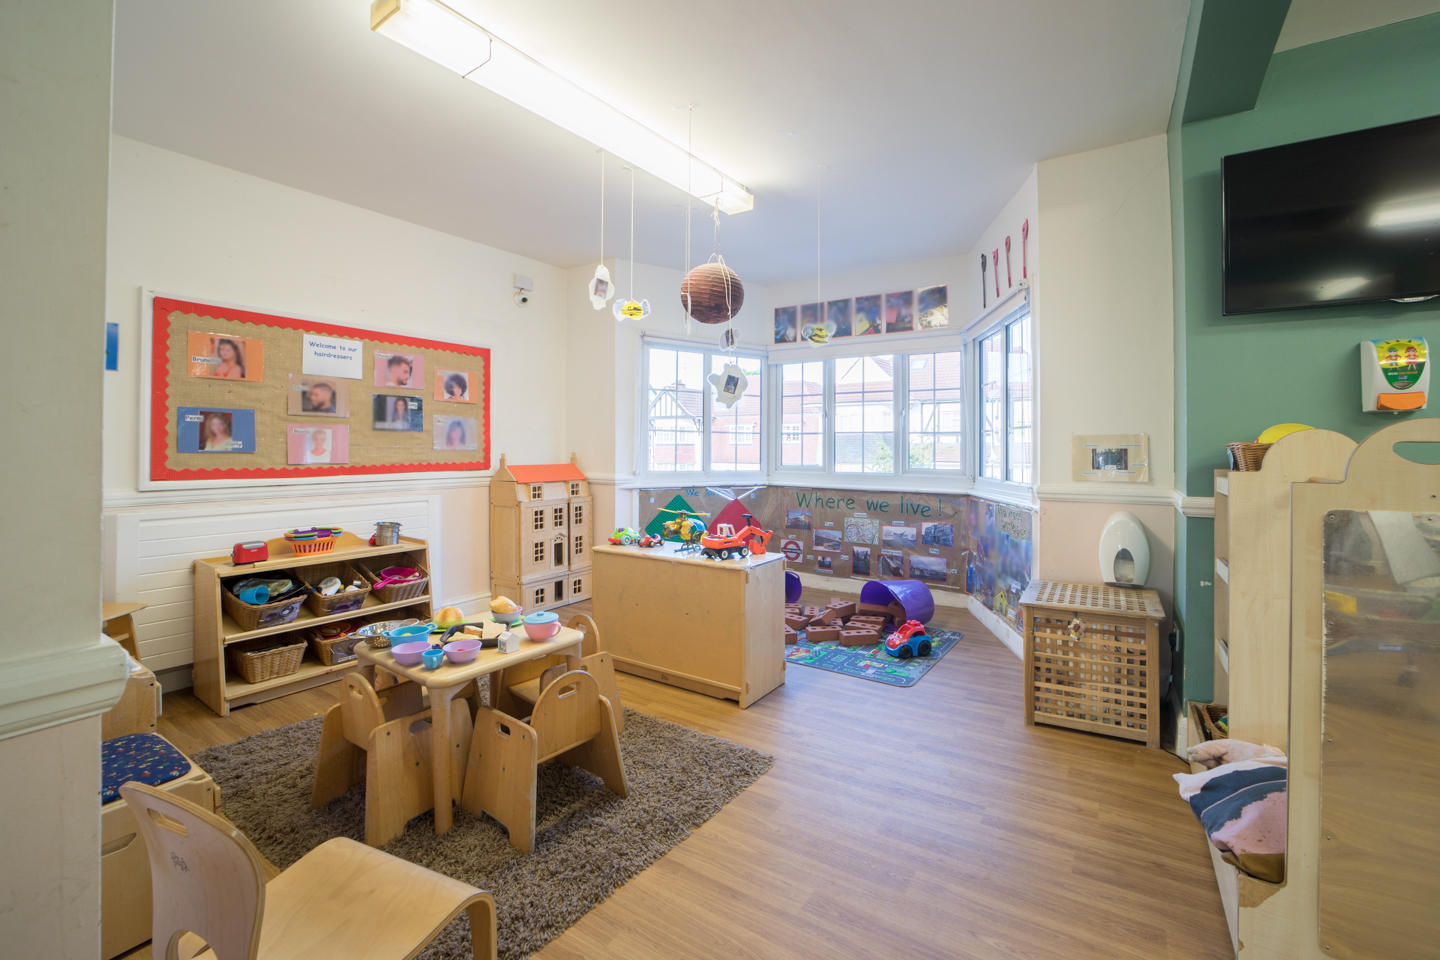 Images Bright Horizons Hendon Day Nursery and Preschool